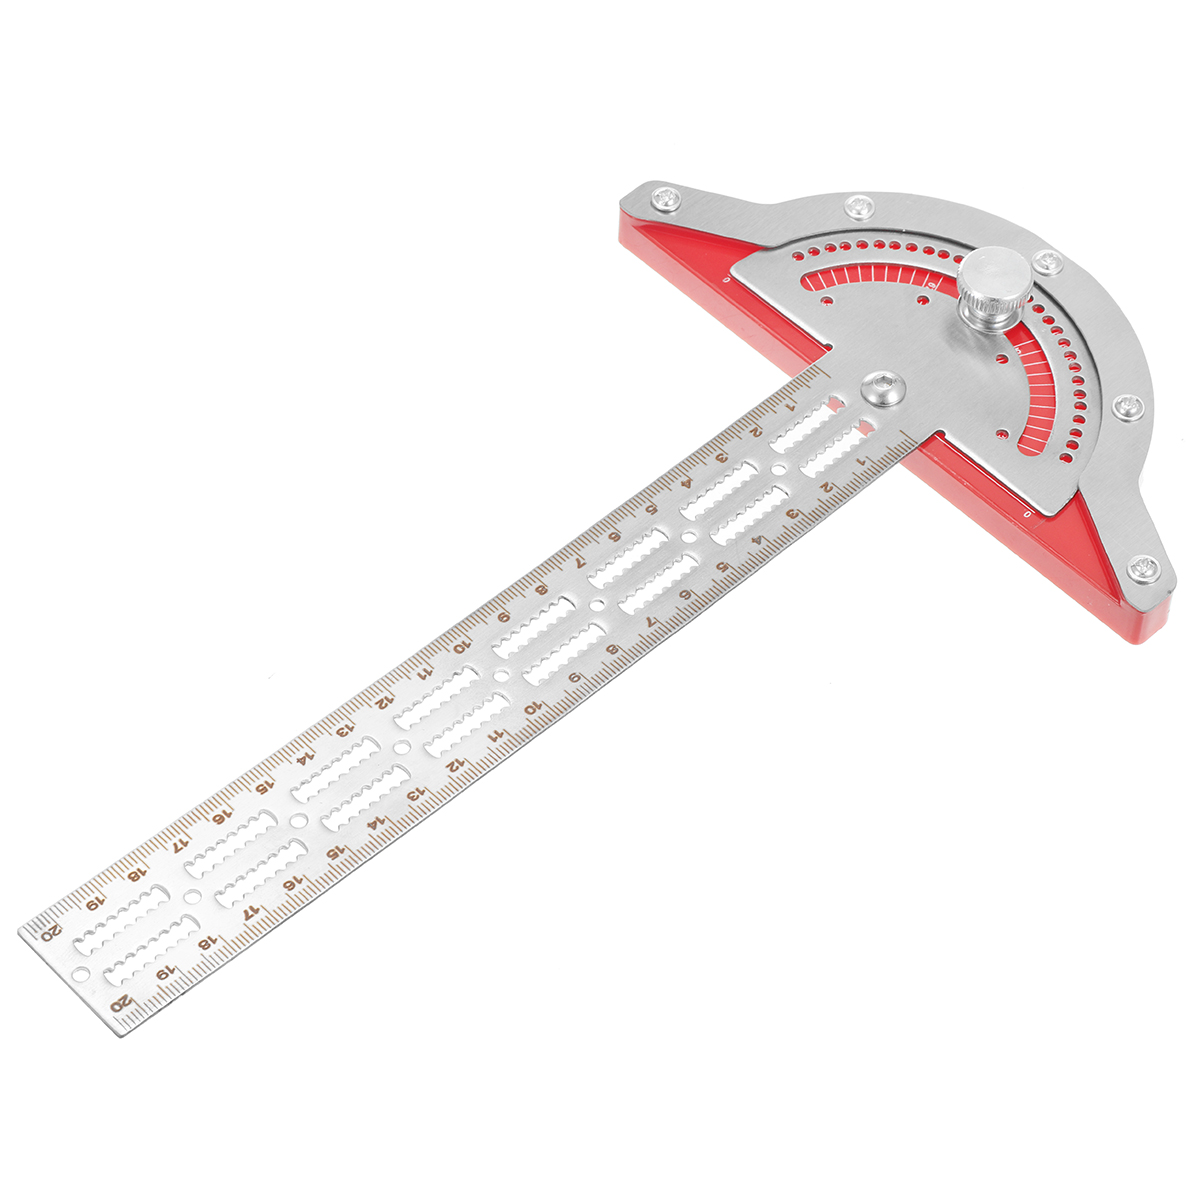 Stainless-Steel-Edge-Ruler-Protractor-Woodworking-Ruler-Angle-Measuring-Tool-Precision-Carpenter-Too-1923789-7